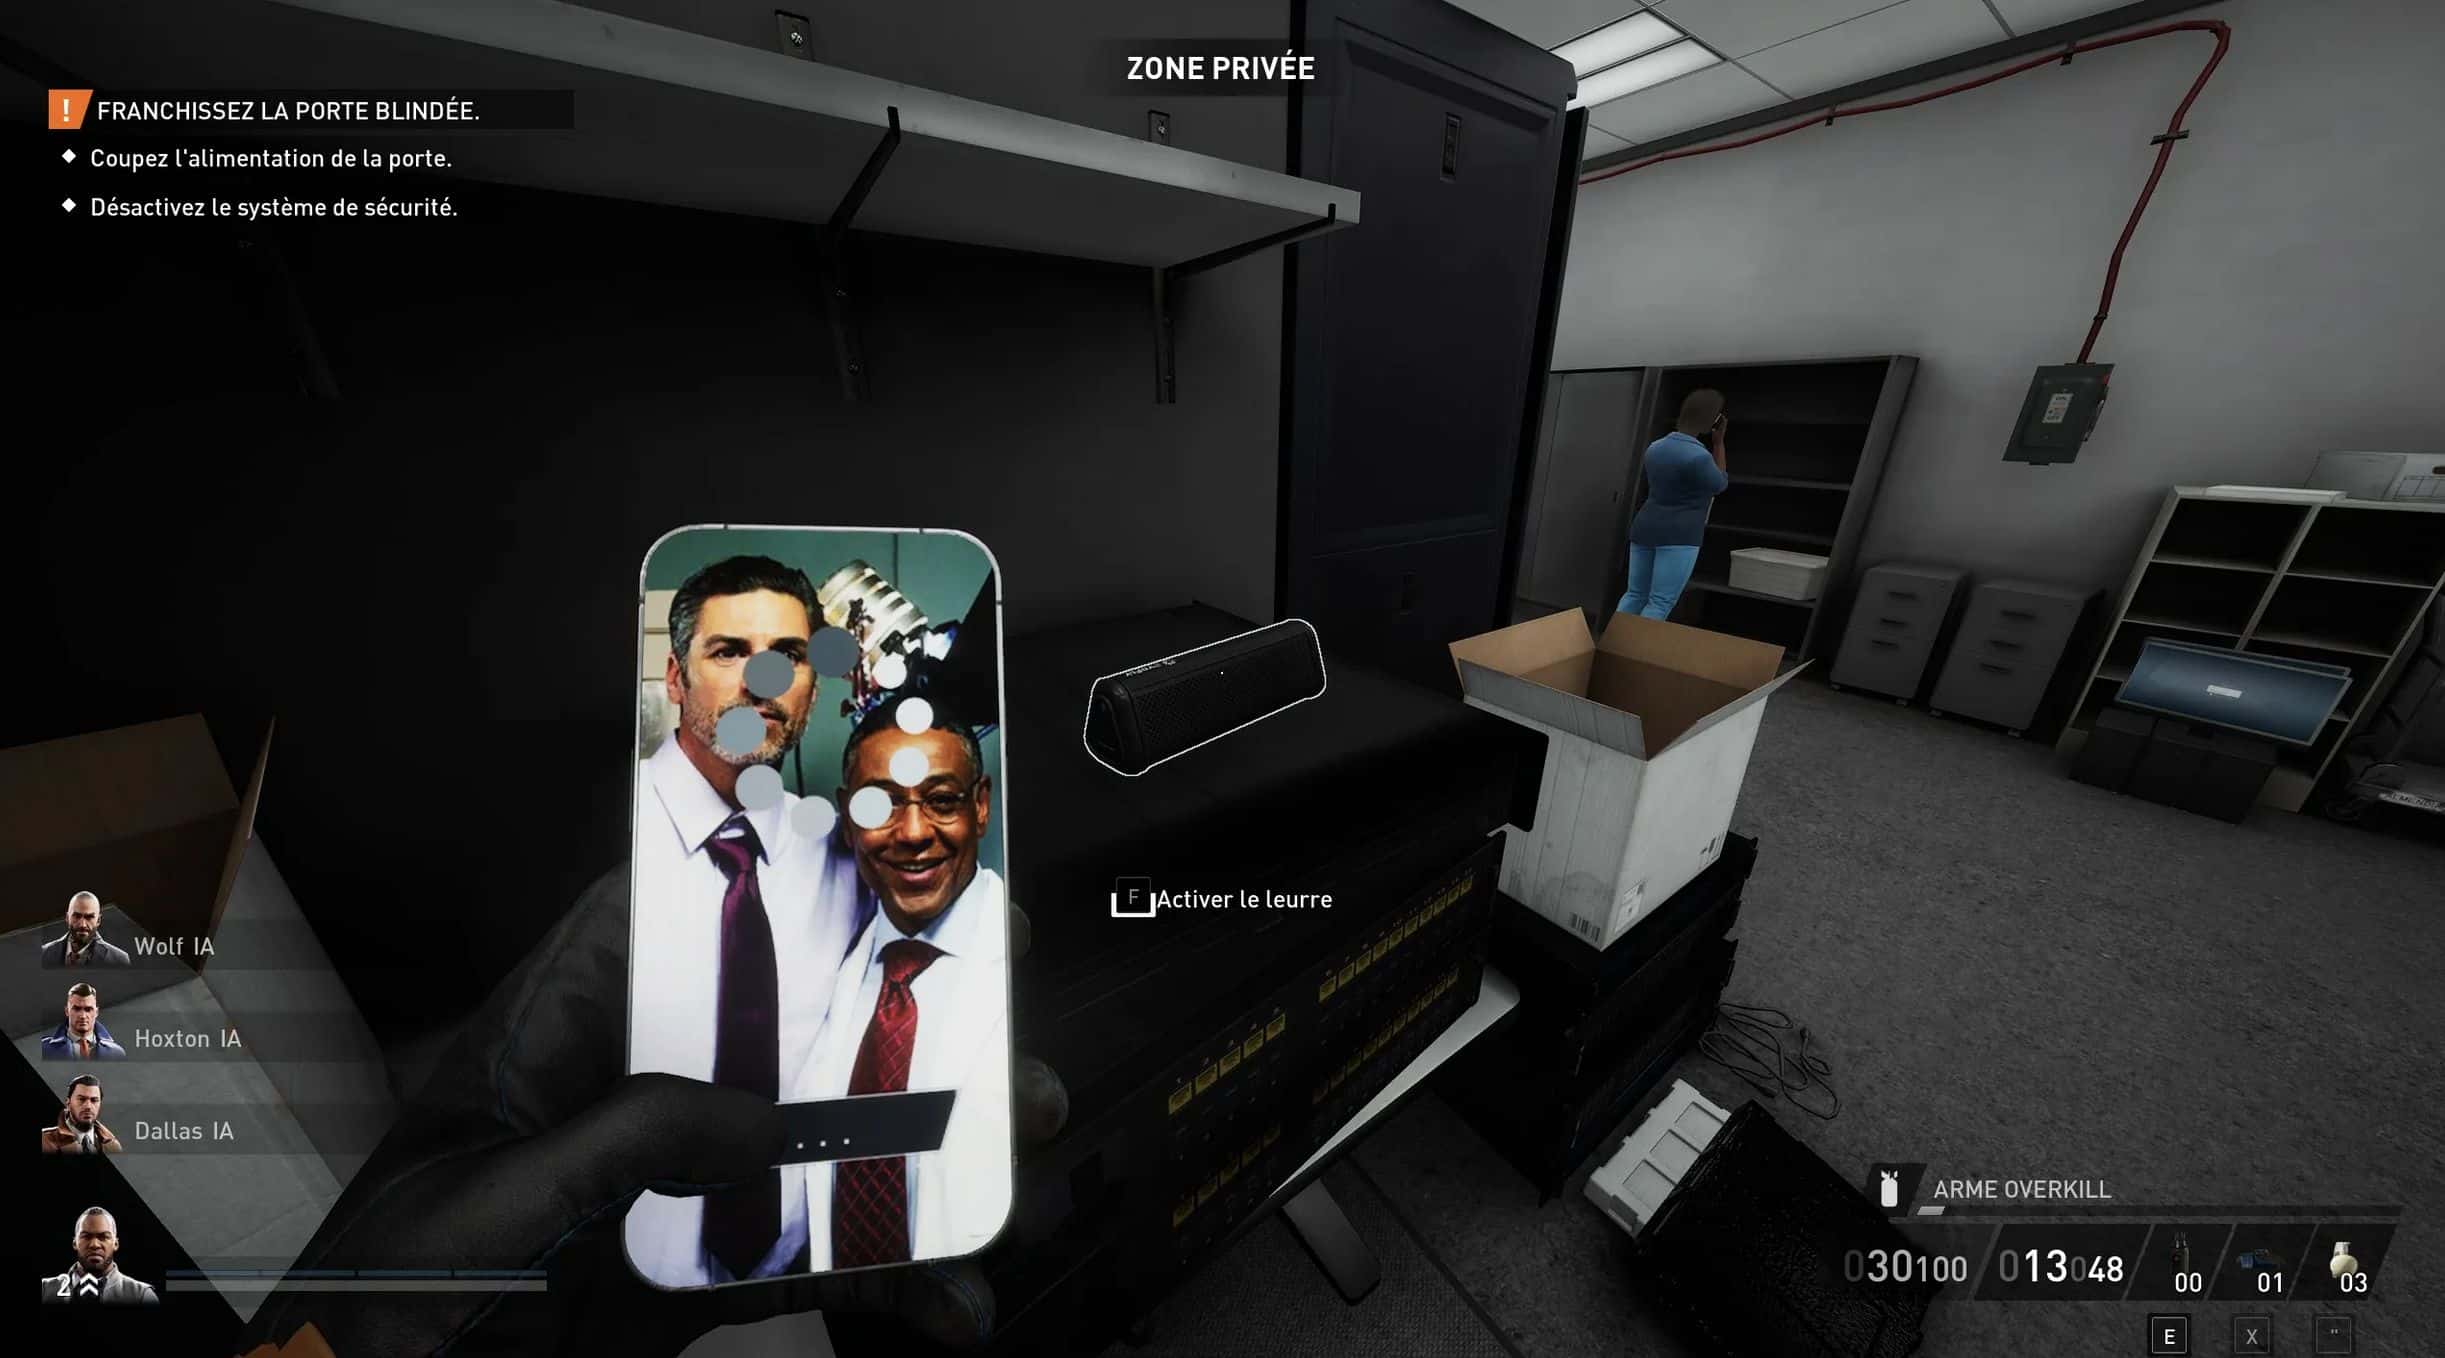 Phone Screen Template - PAYDAY 3 Mods - ModWorkshop